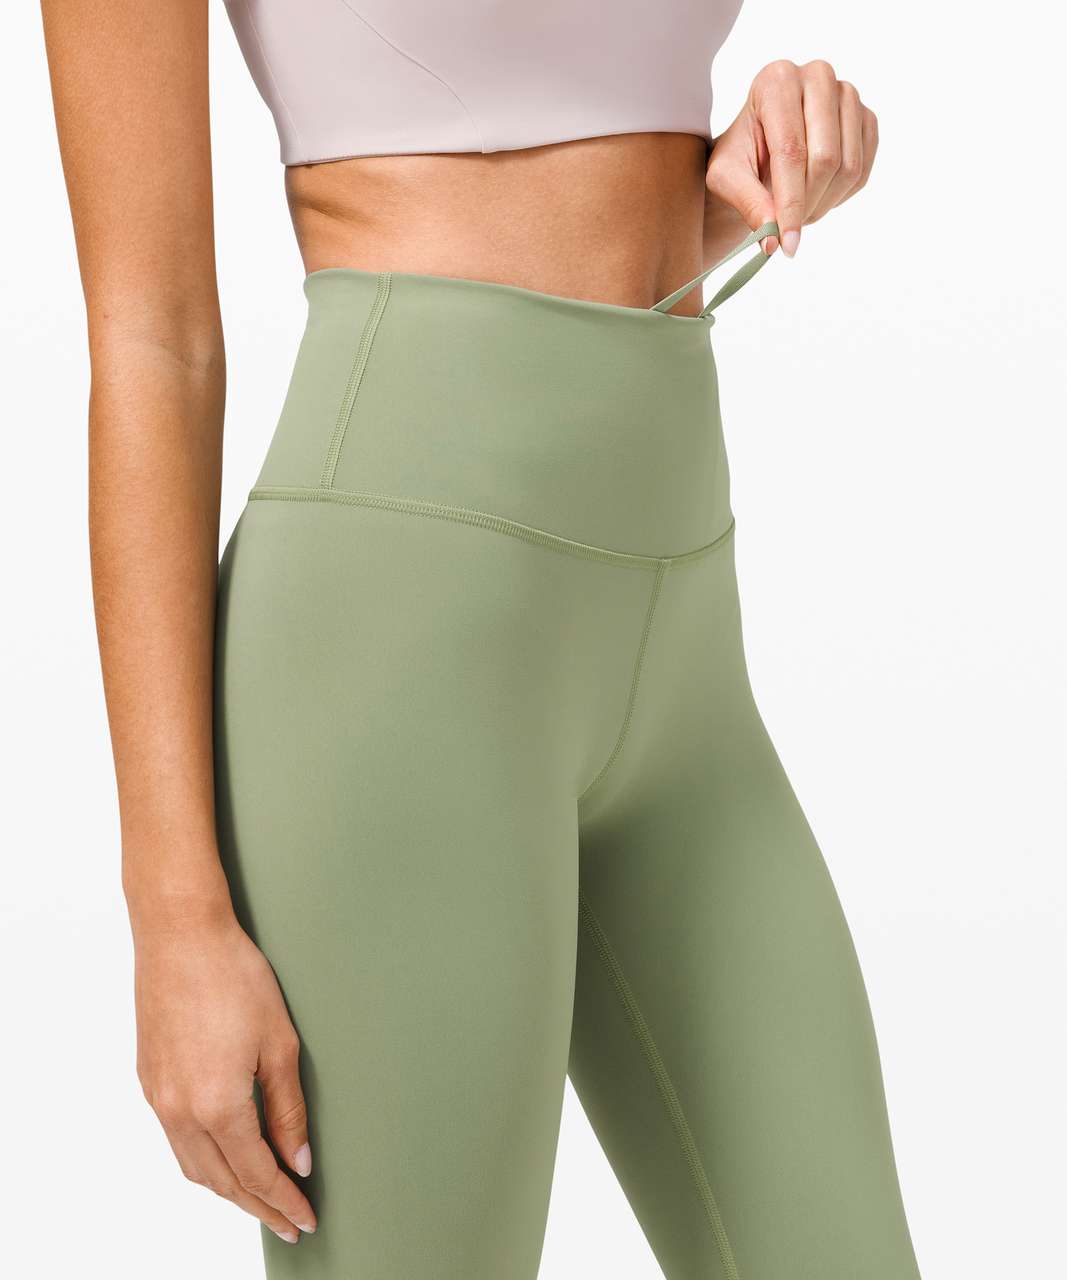 Lululemon Wunder Train High-Rise Tight 25" - Willow Green